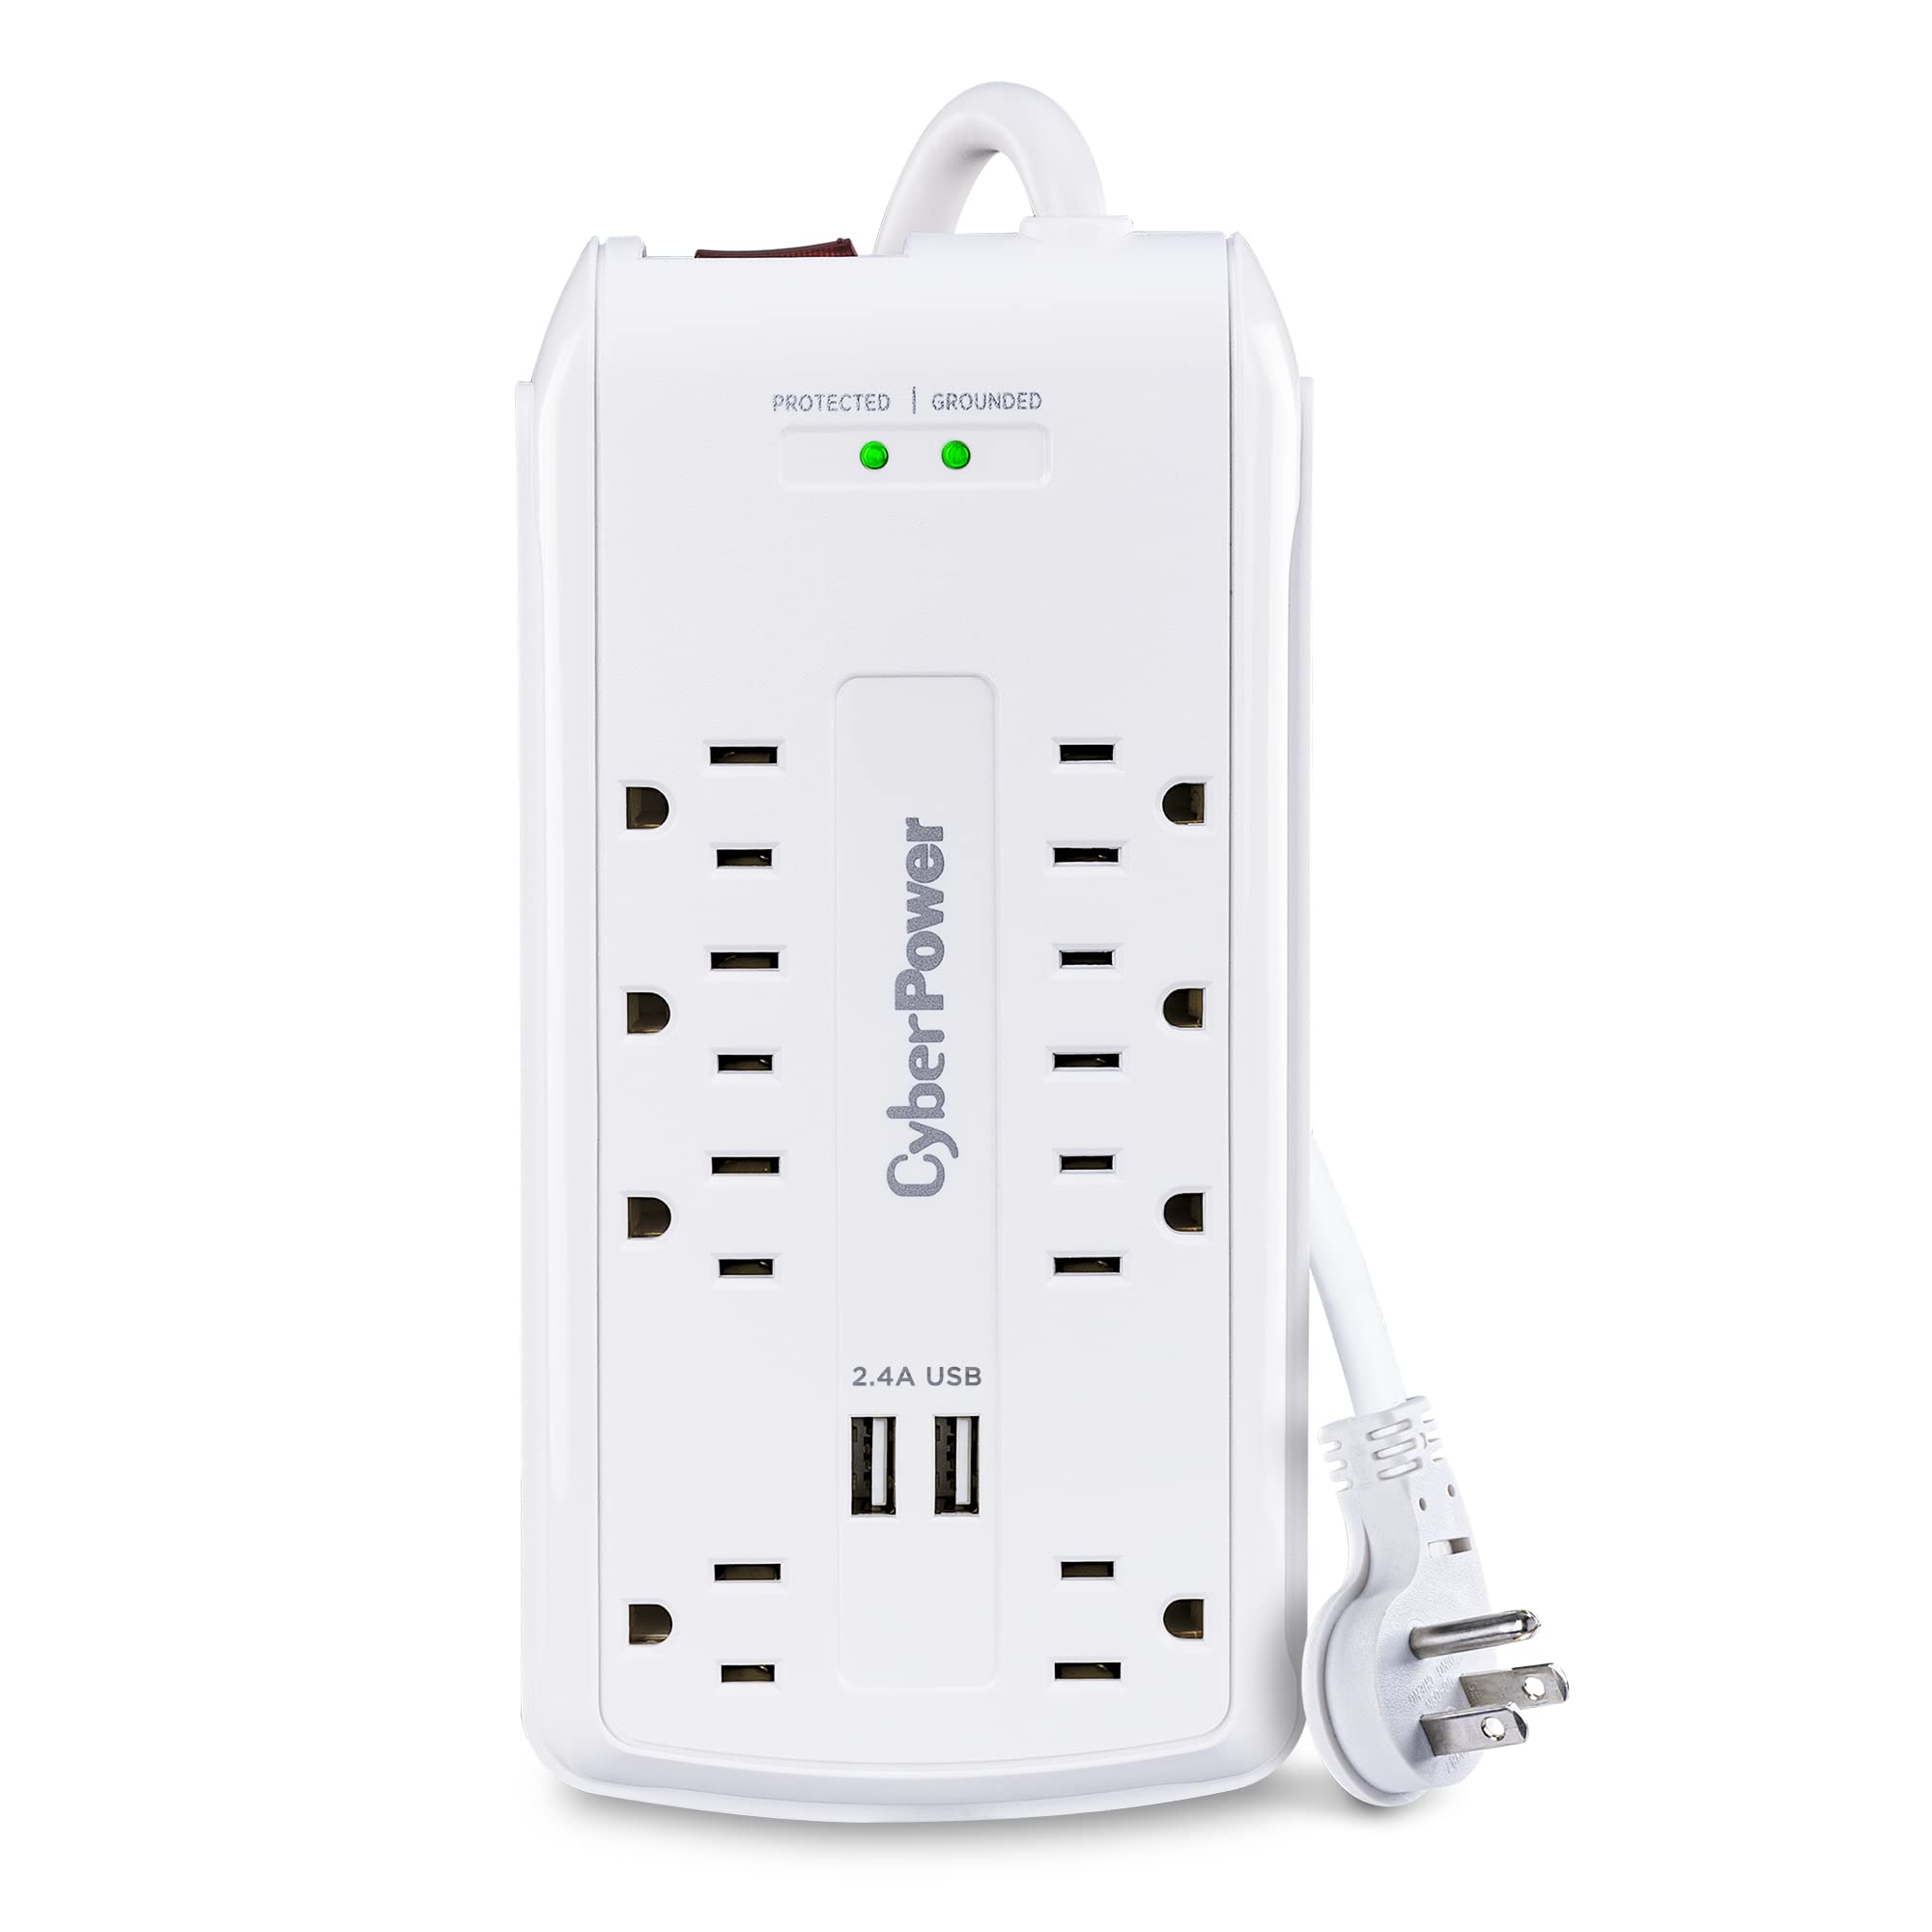 CyberPower CSP806U Professional Surge Protector, 3000J/125V, 15A, 8 Outlets, 2 USB Charging Ports, 6 Foot Cord, White